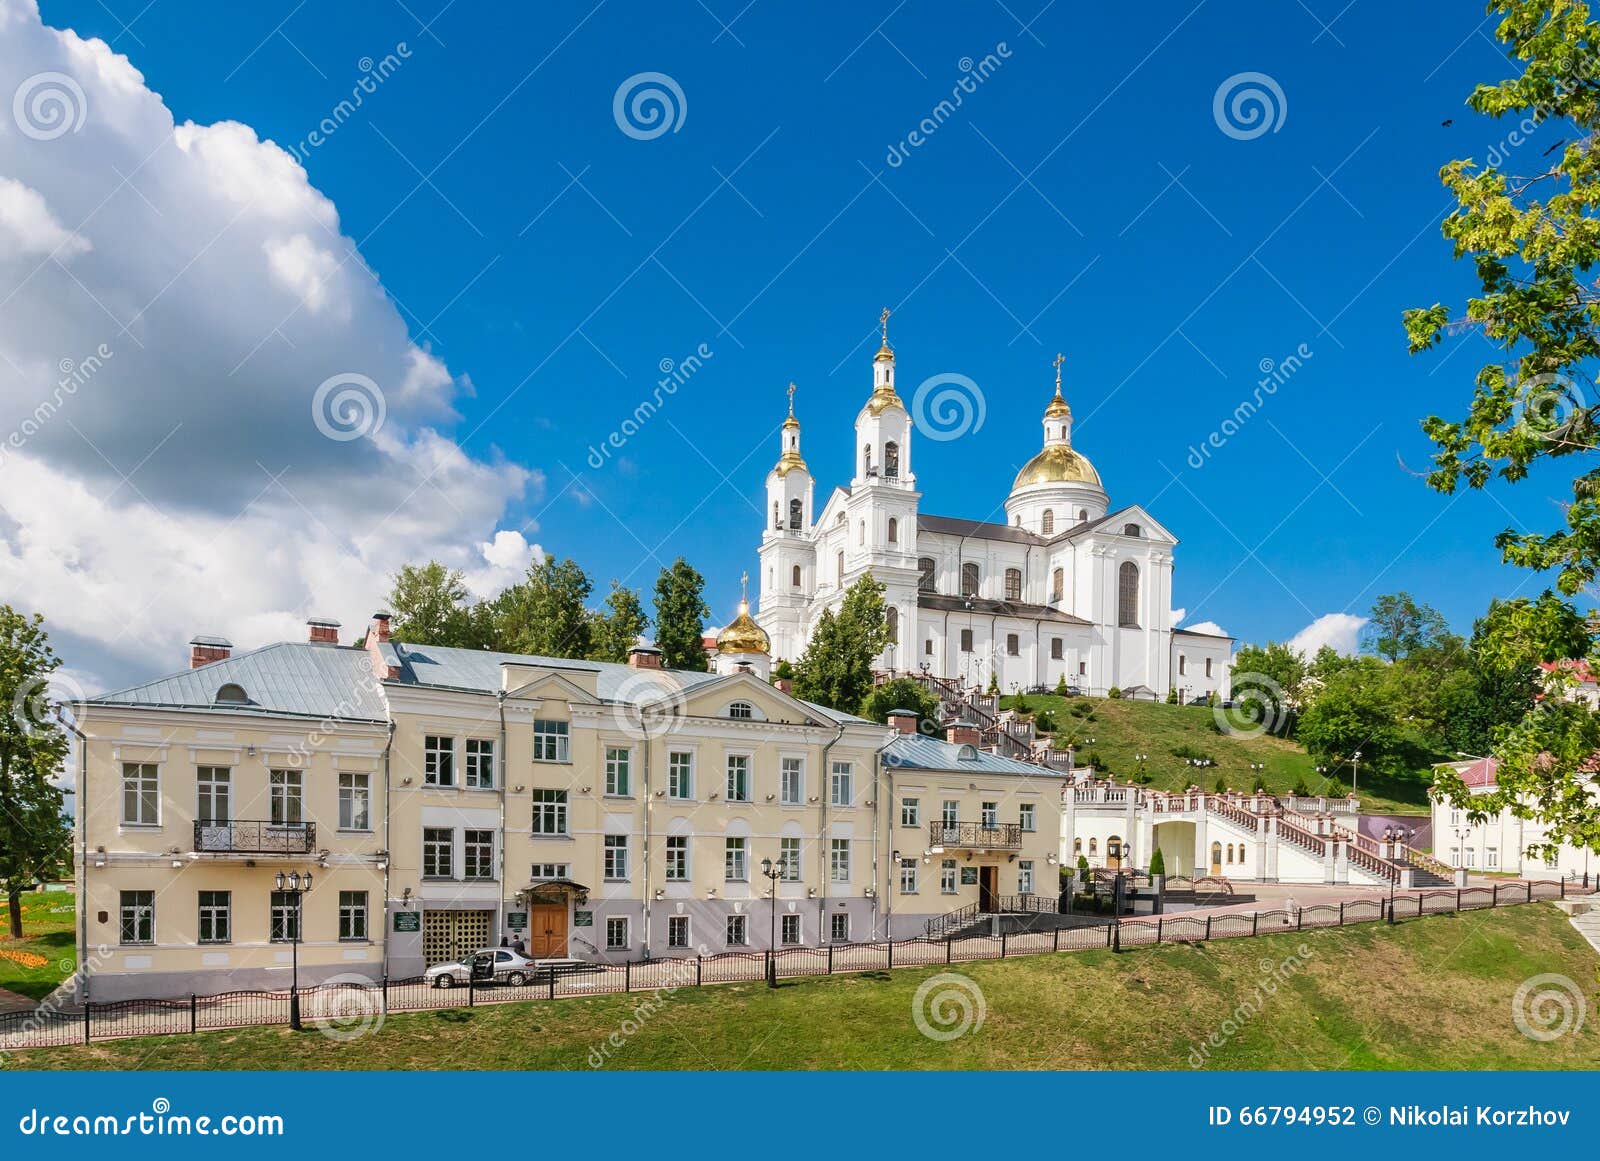 holy assumption cathedral of the assumption and the holy spirit convent. vitebsk, belarus